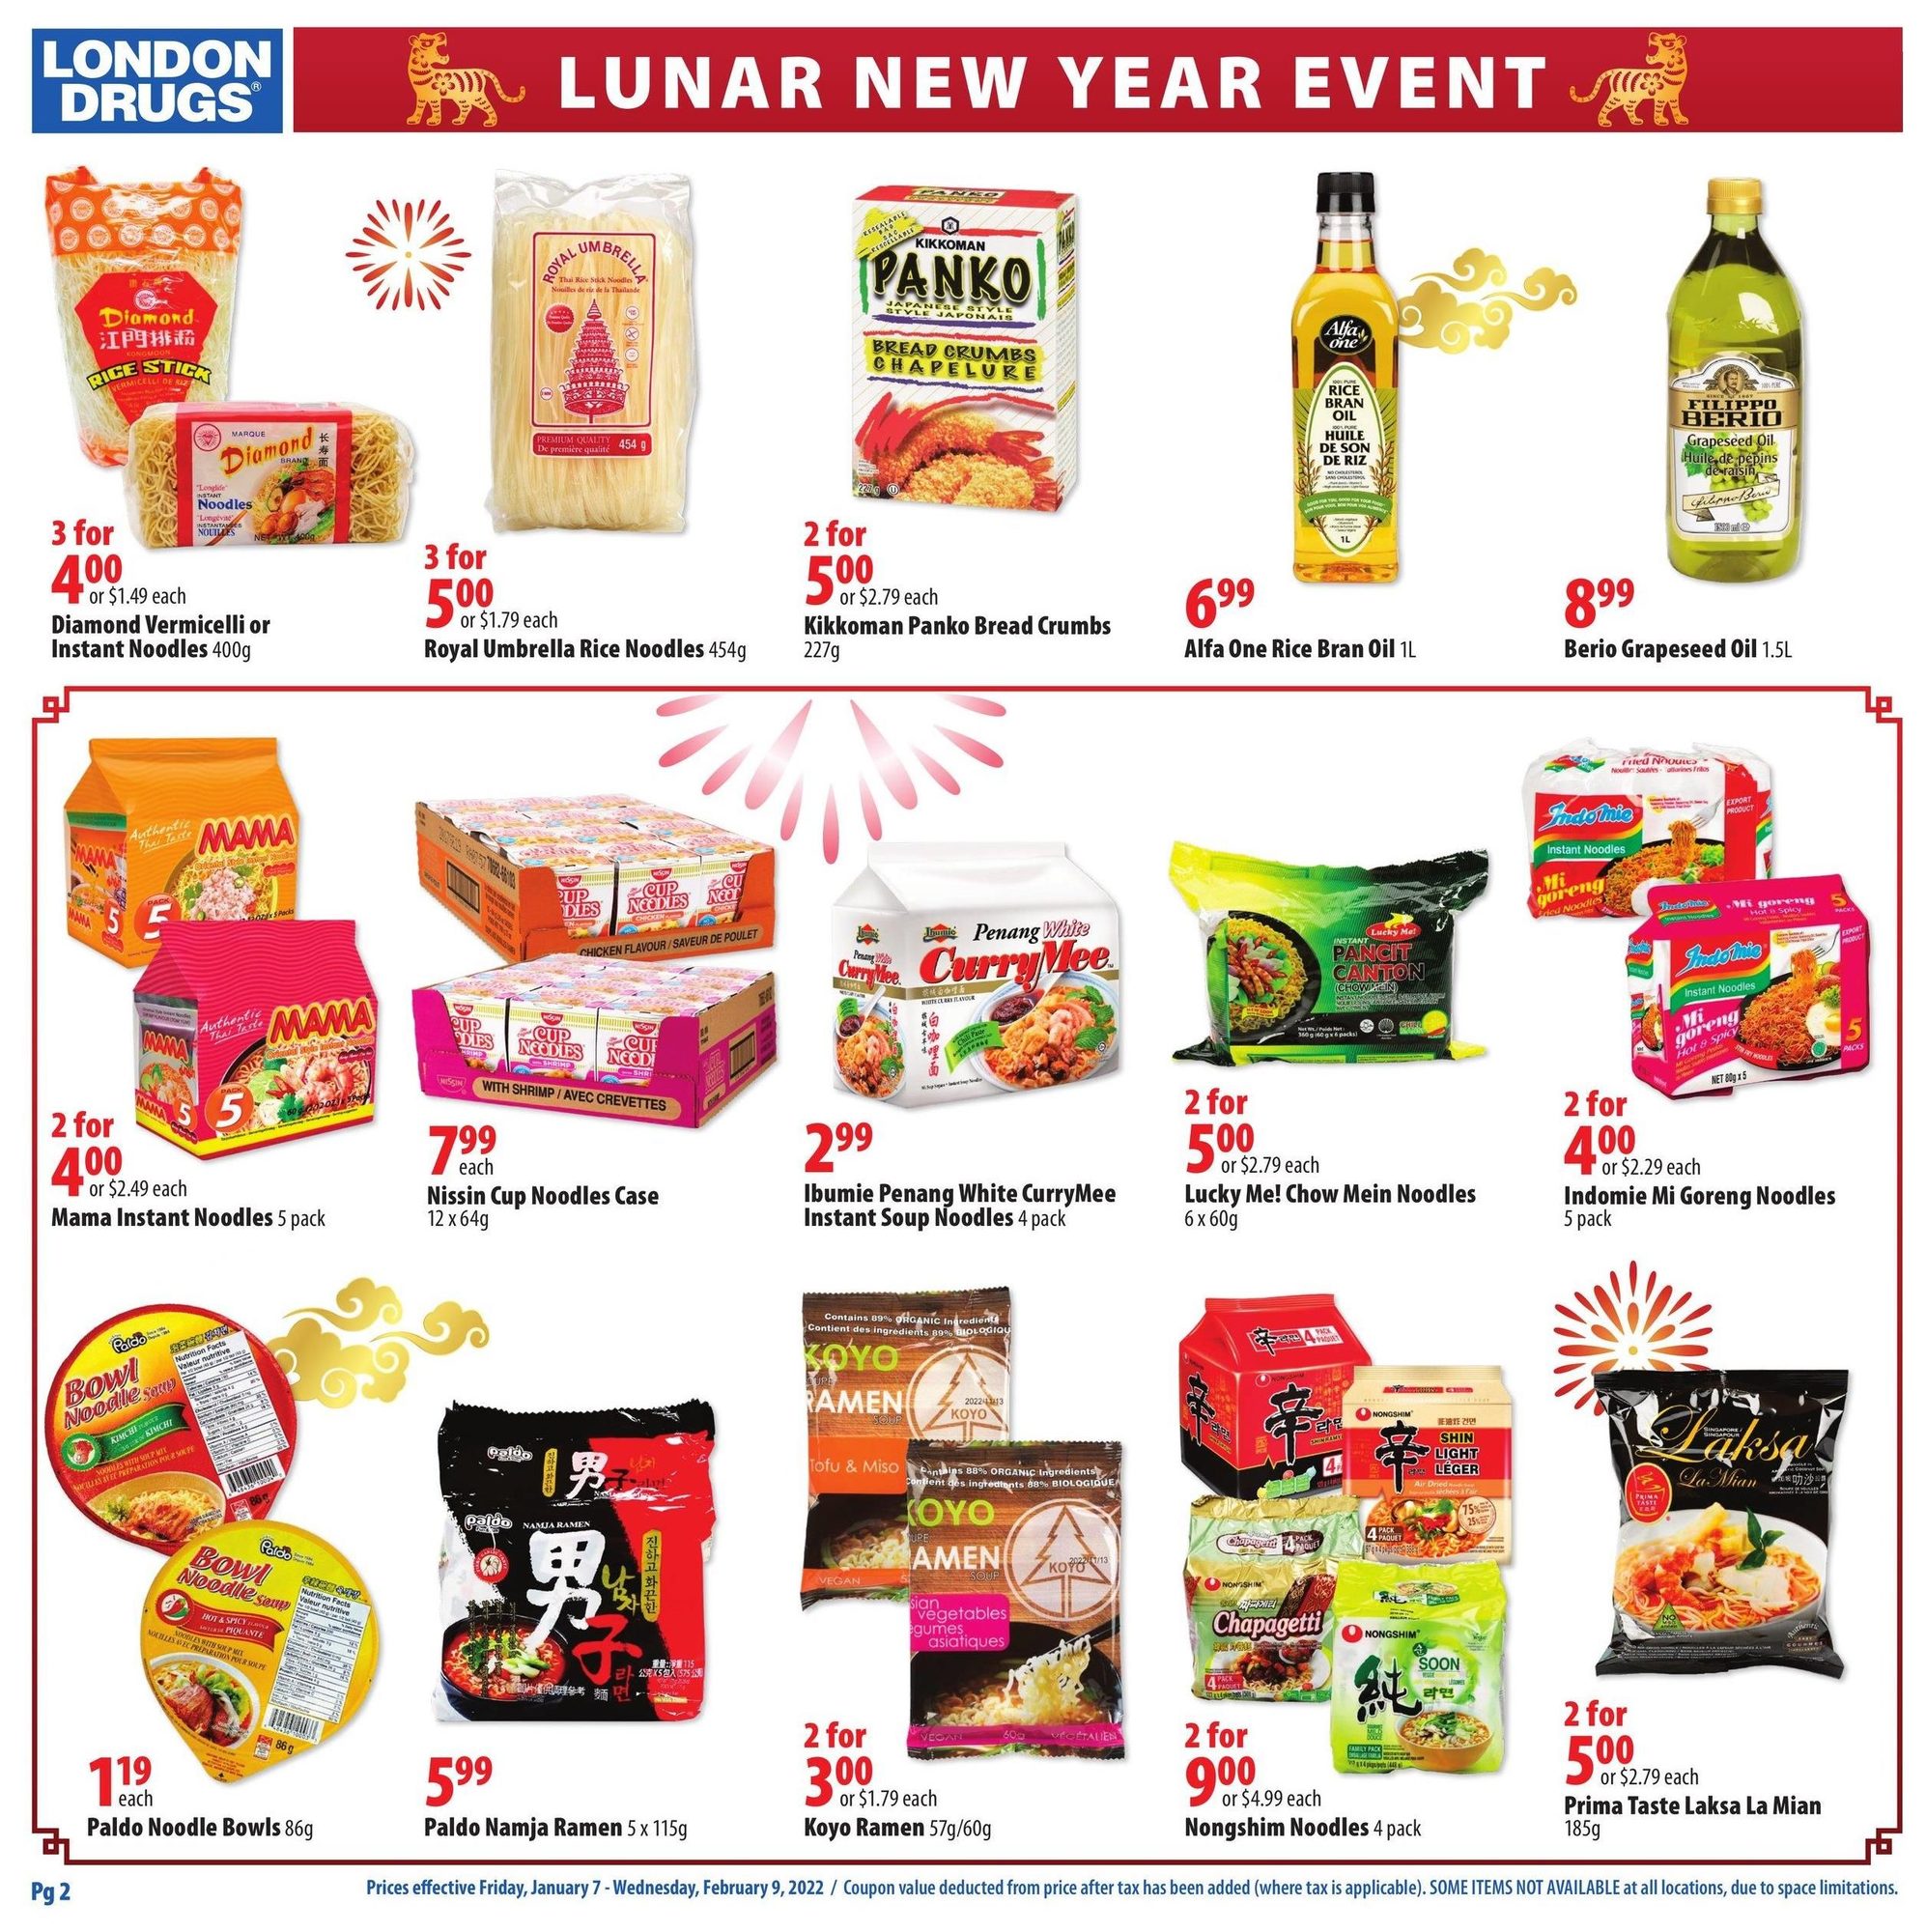 London Drugs - Lunar New Year Event - Page 2